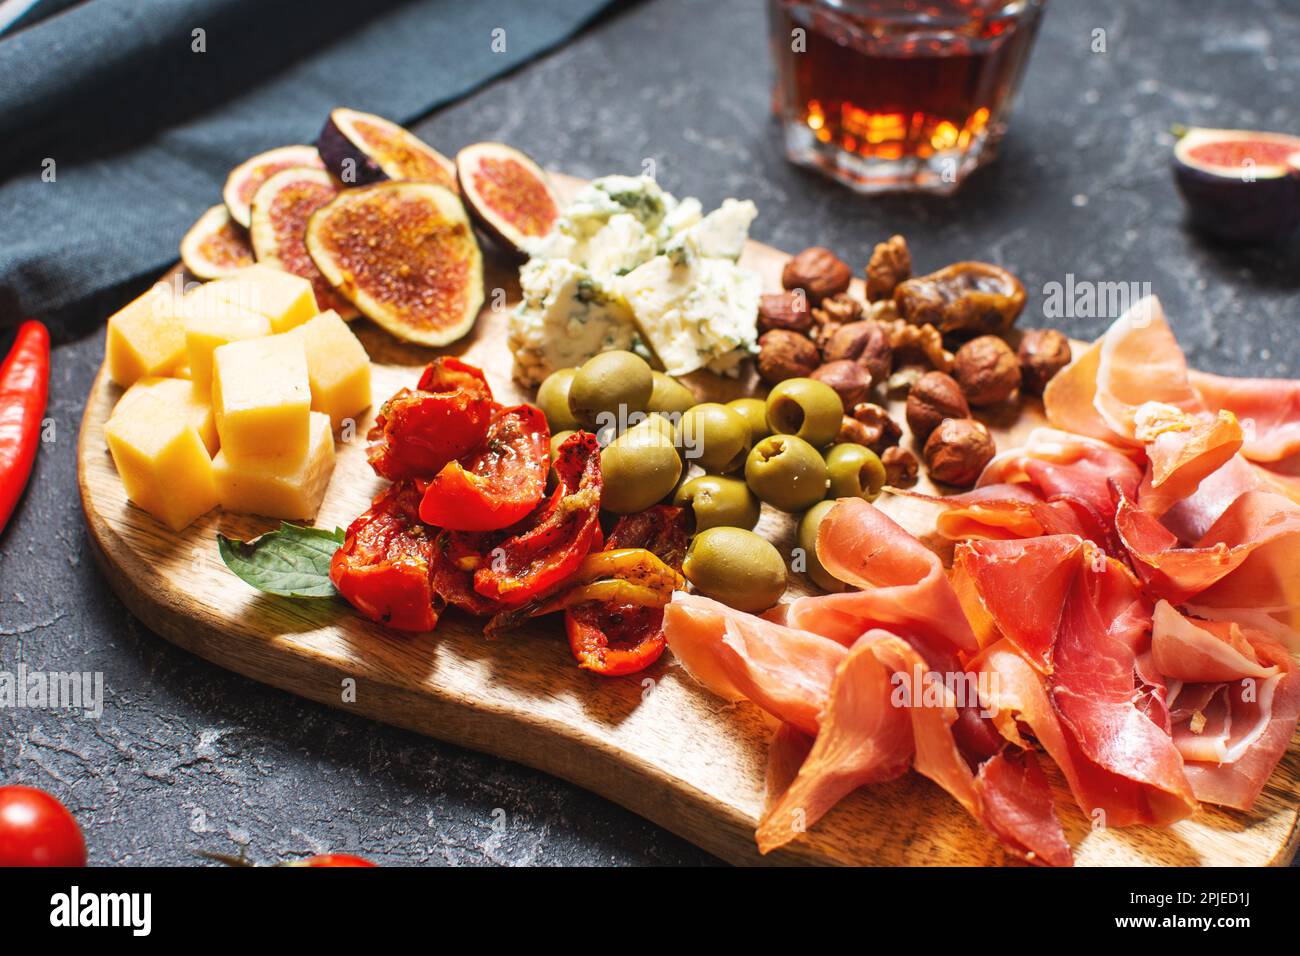 Antipasto platter with ham, prosciutto, blue cheese, dried tomatoes, figs and olives on a wooden bord. Stock Photo